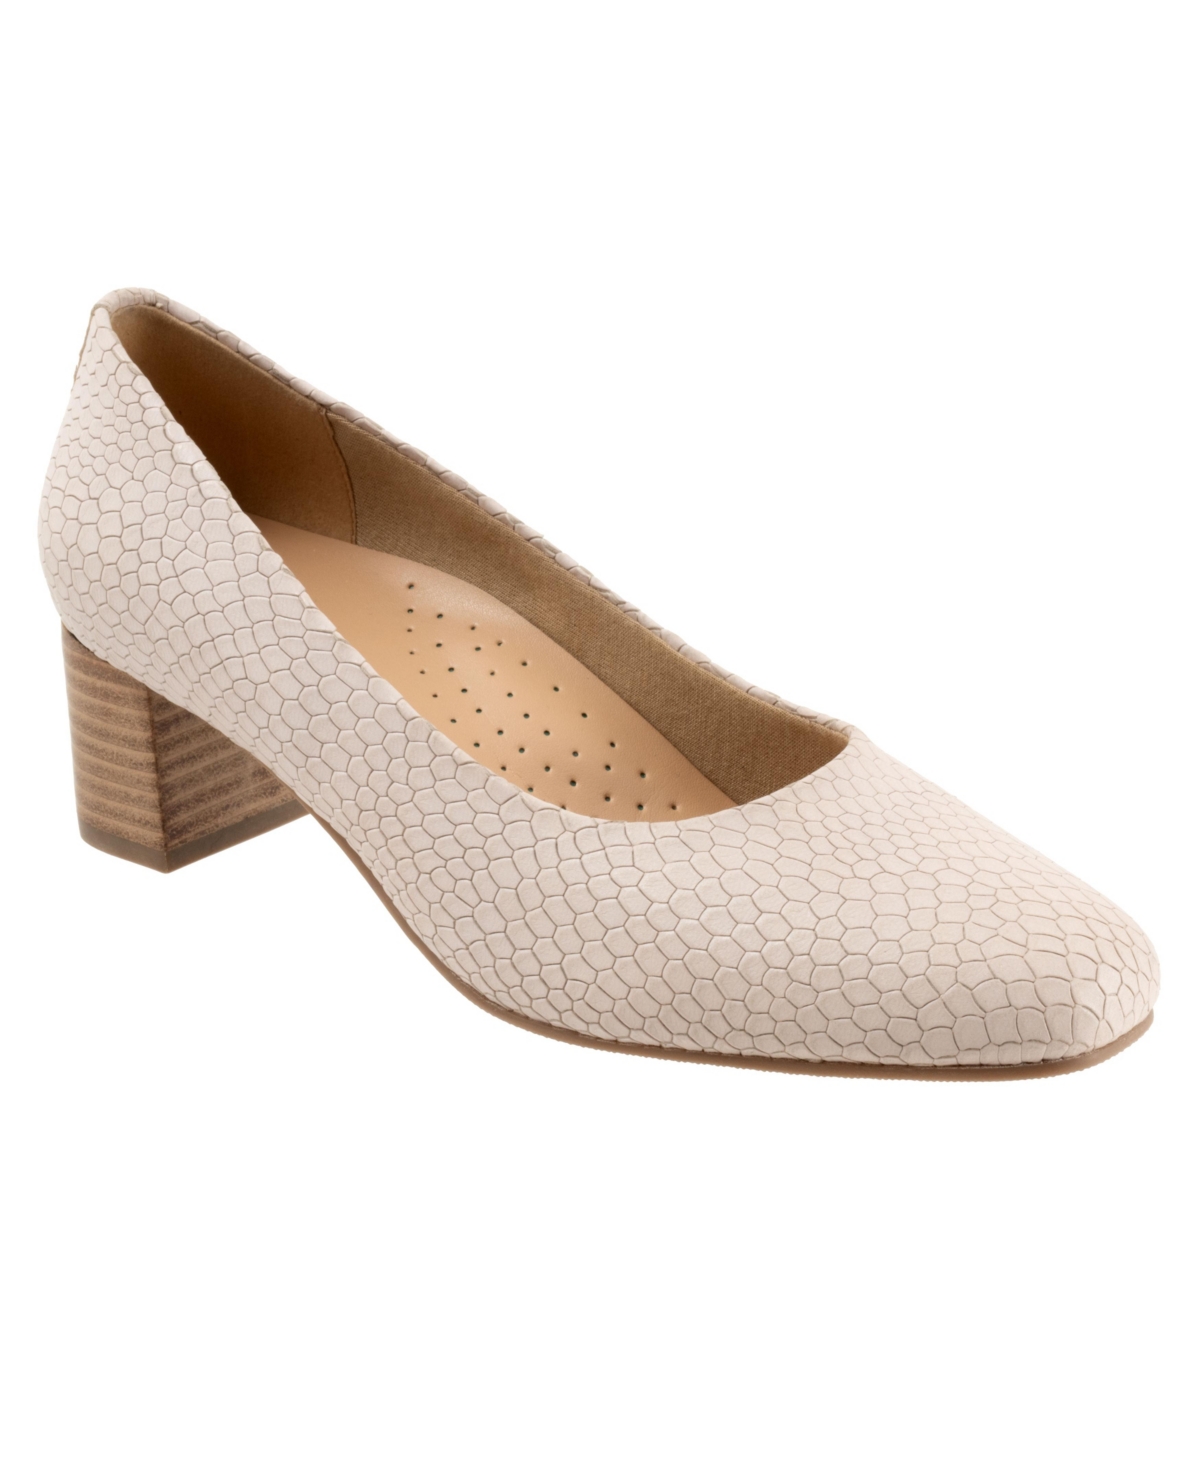 Women's Trotters Daria Pumps - Ivory snake